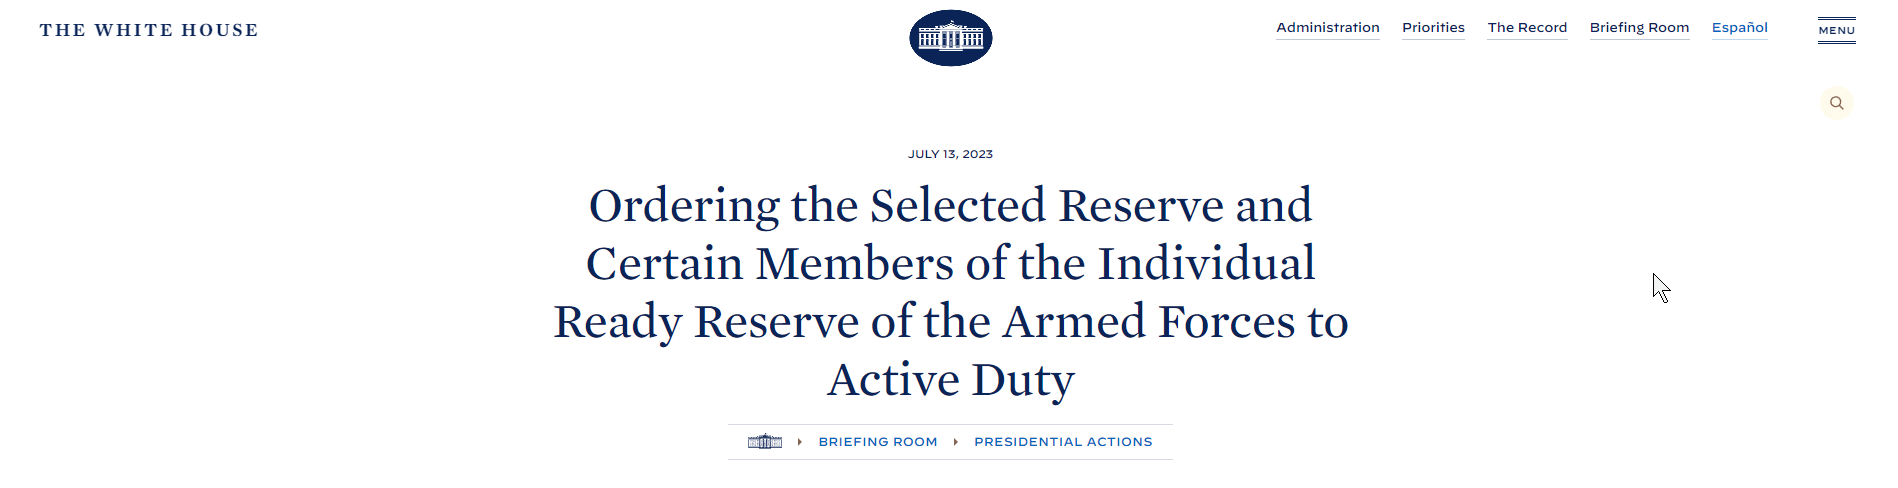 2023_07_13_22_34_39_Ordering_the_Selected_Reserve_and_Certain_Members_of_the_Individual_Ready_Reserv